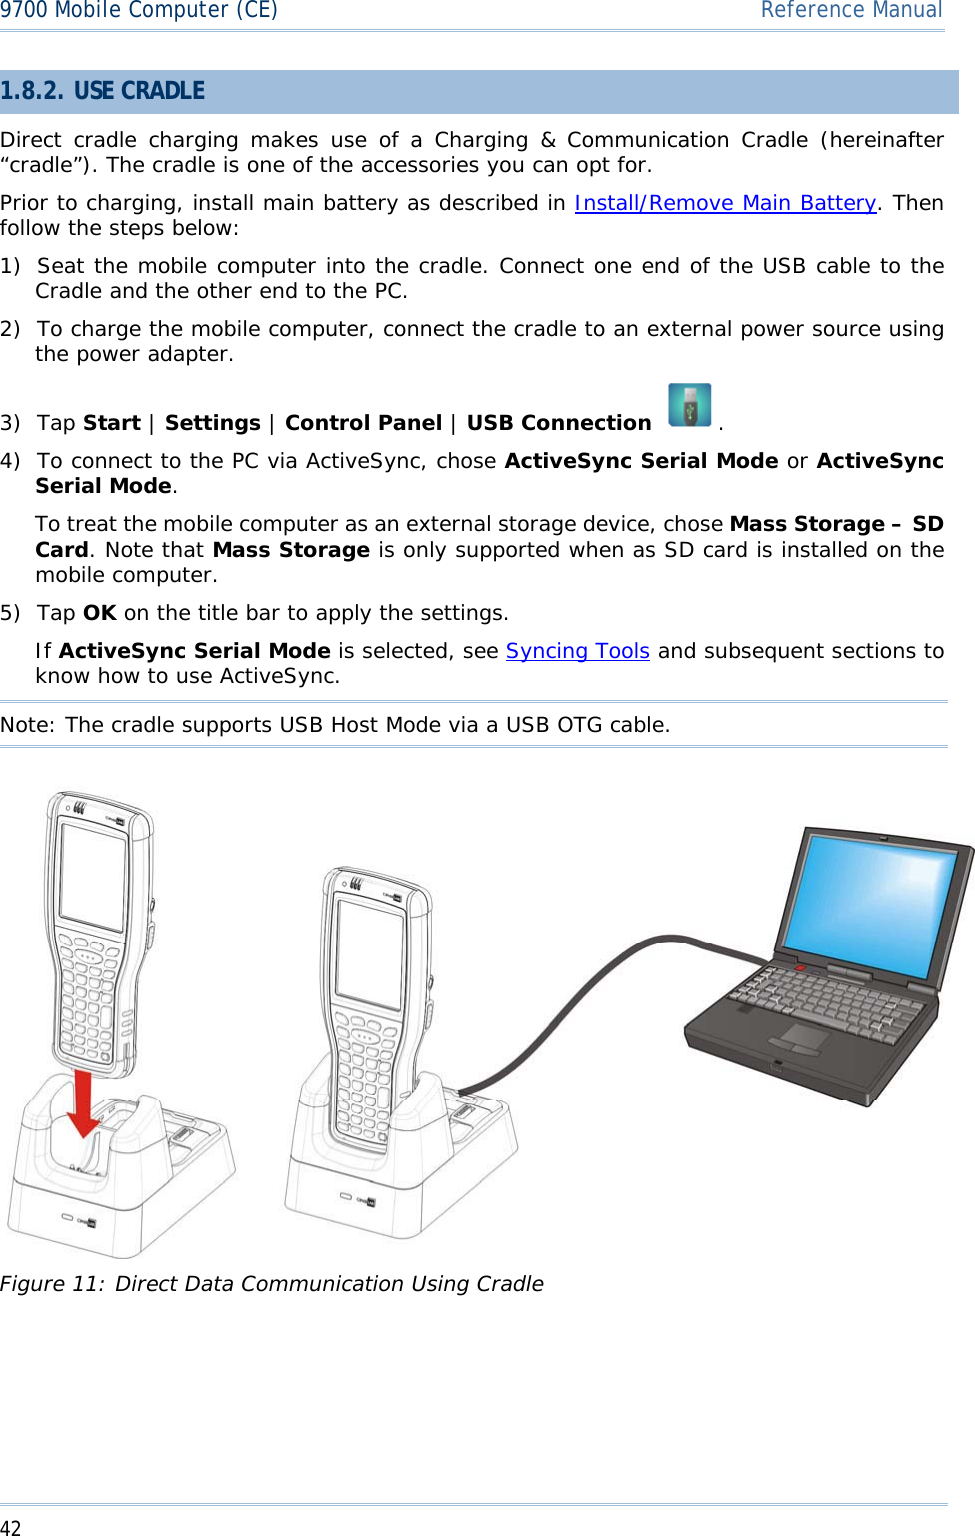 429700 Mobile Computer (CE)  Reference Manual1.8.2. USE CRADLE Direct cradle charging makes use of a Charging &amp; Communication Cradle (hereinafter “cradle”). The cradle is one of the accessories you can opt for. Prior to charging, install main battery as described in Install/Remove Main Battery. Then follow the steps below: 1) Seat the mobile computer into the cradle. Connect one end of the USB cable to the Cradle and the other end to the PC. 2) To charge the mobile computer, connect the cradle to an external power source using the power adapter. 3) Tap Start |Settings |Control Panel |USB Connection  .4) To connect to the PC via ActiveSync, chose ActiveSync Serial Mode or ActiveSync Serial Mode.To treat the mobile computer as an external storage device, chose Mass Storage – SD Card. Note that Mass Storage is only supported when as SD card is installed on the mobile computer. 5) Tap OK on the title bar to apply the settings.  If ActiveSync Serial Mode is selected, see Syncing Tools and subsequent sections to know how to use ActiveSync. Note: The cradle supports USB Host Mode via a USB OTG cable. Figure 11: Direct Data Communication Using Cradle 